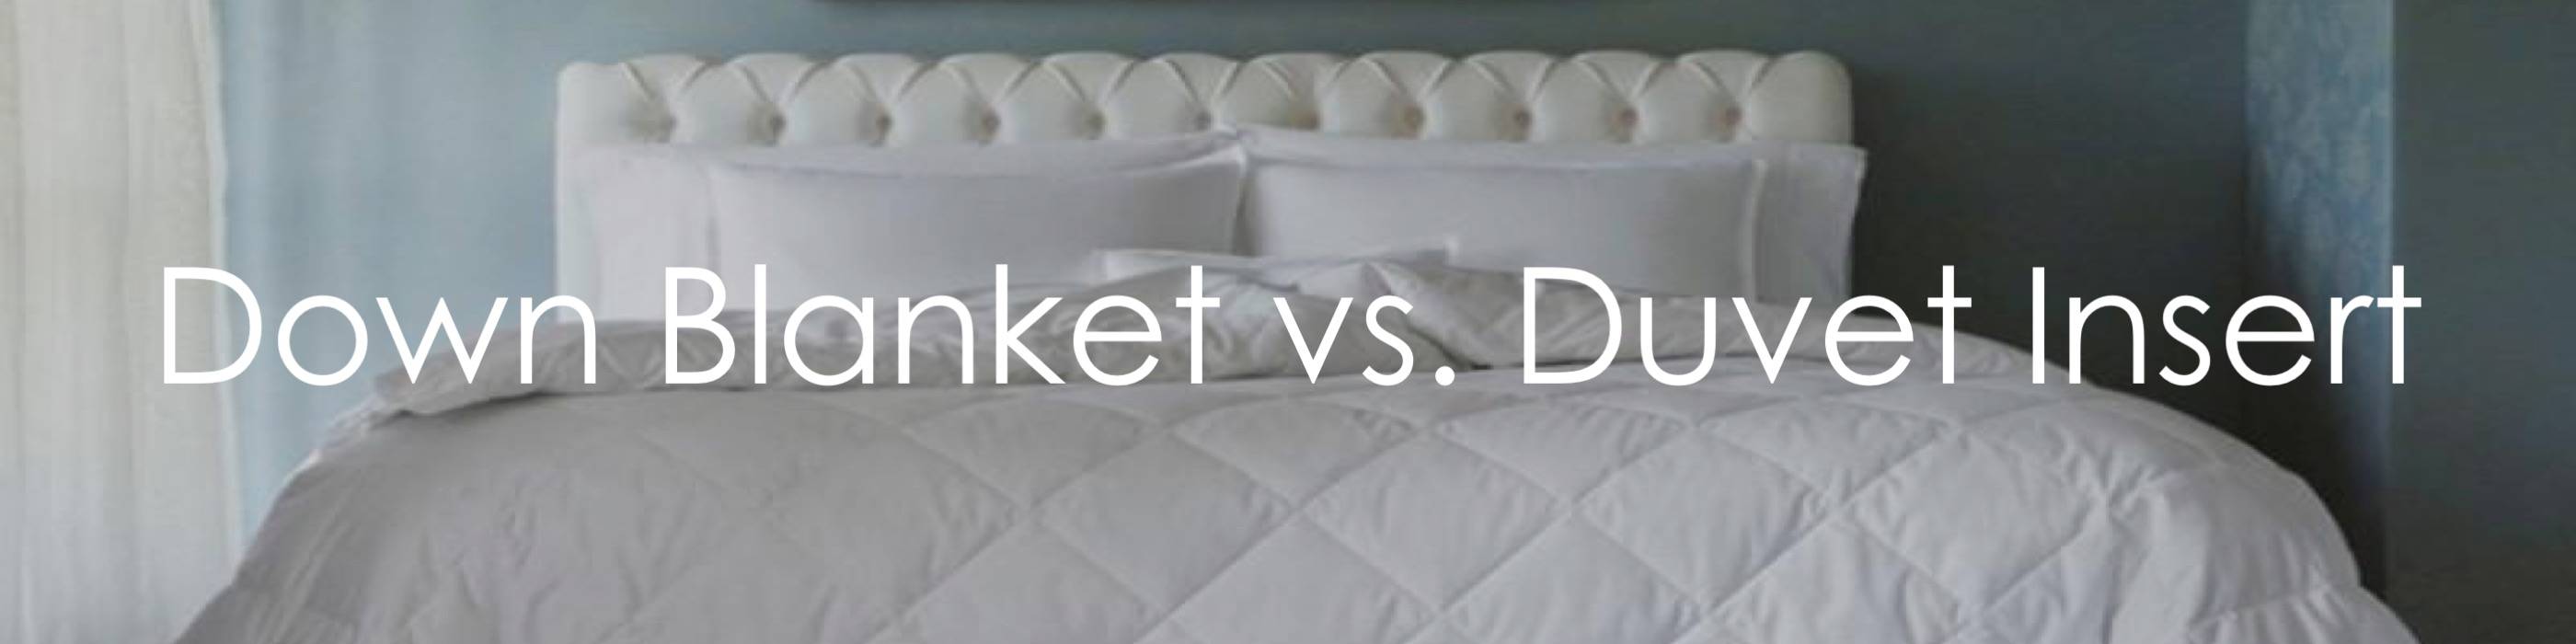 Down Blanket Cover Vs Duvet Insert, Can You Use A Duvet Cover Without An Insert